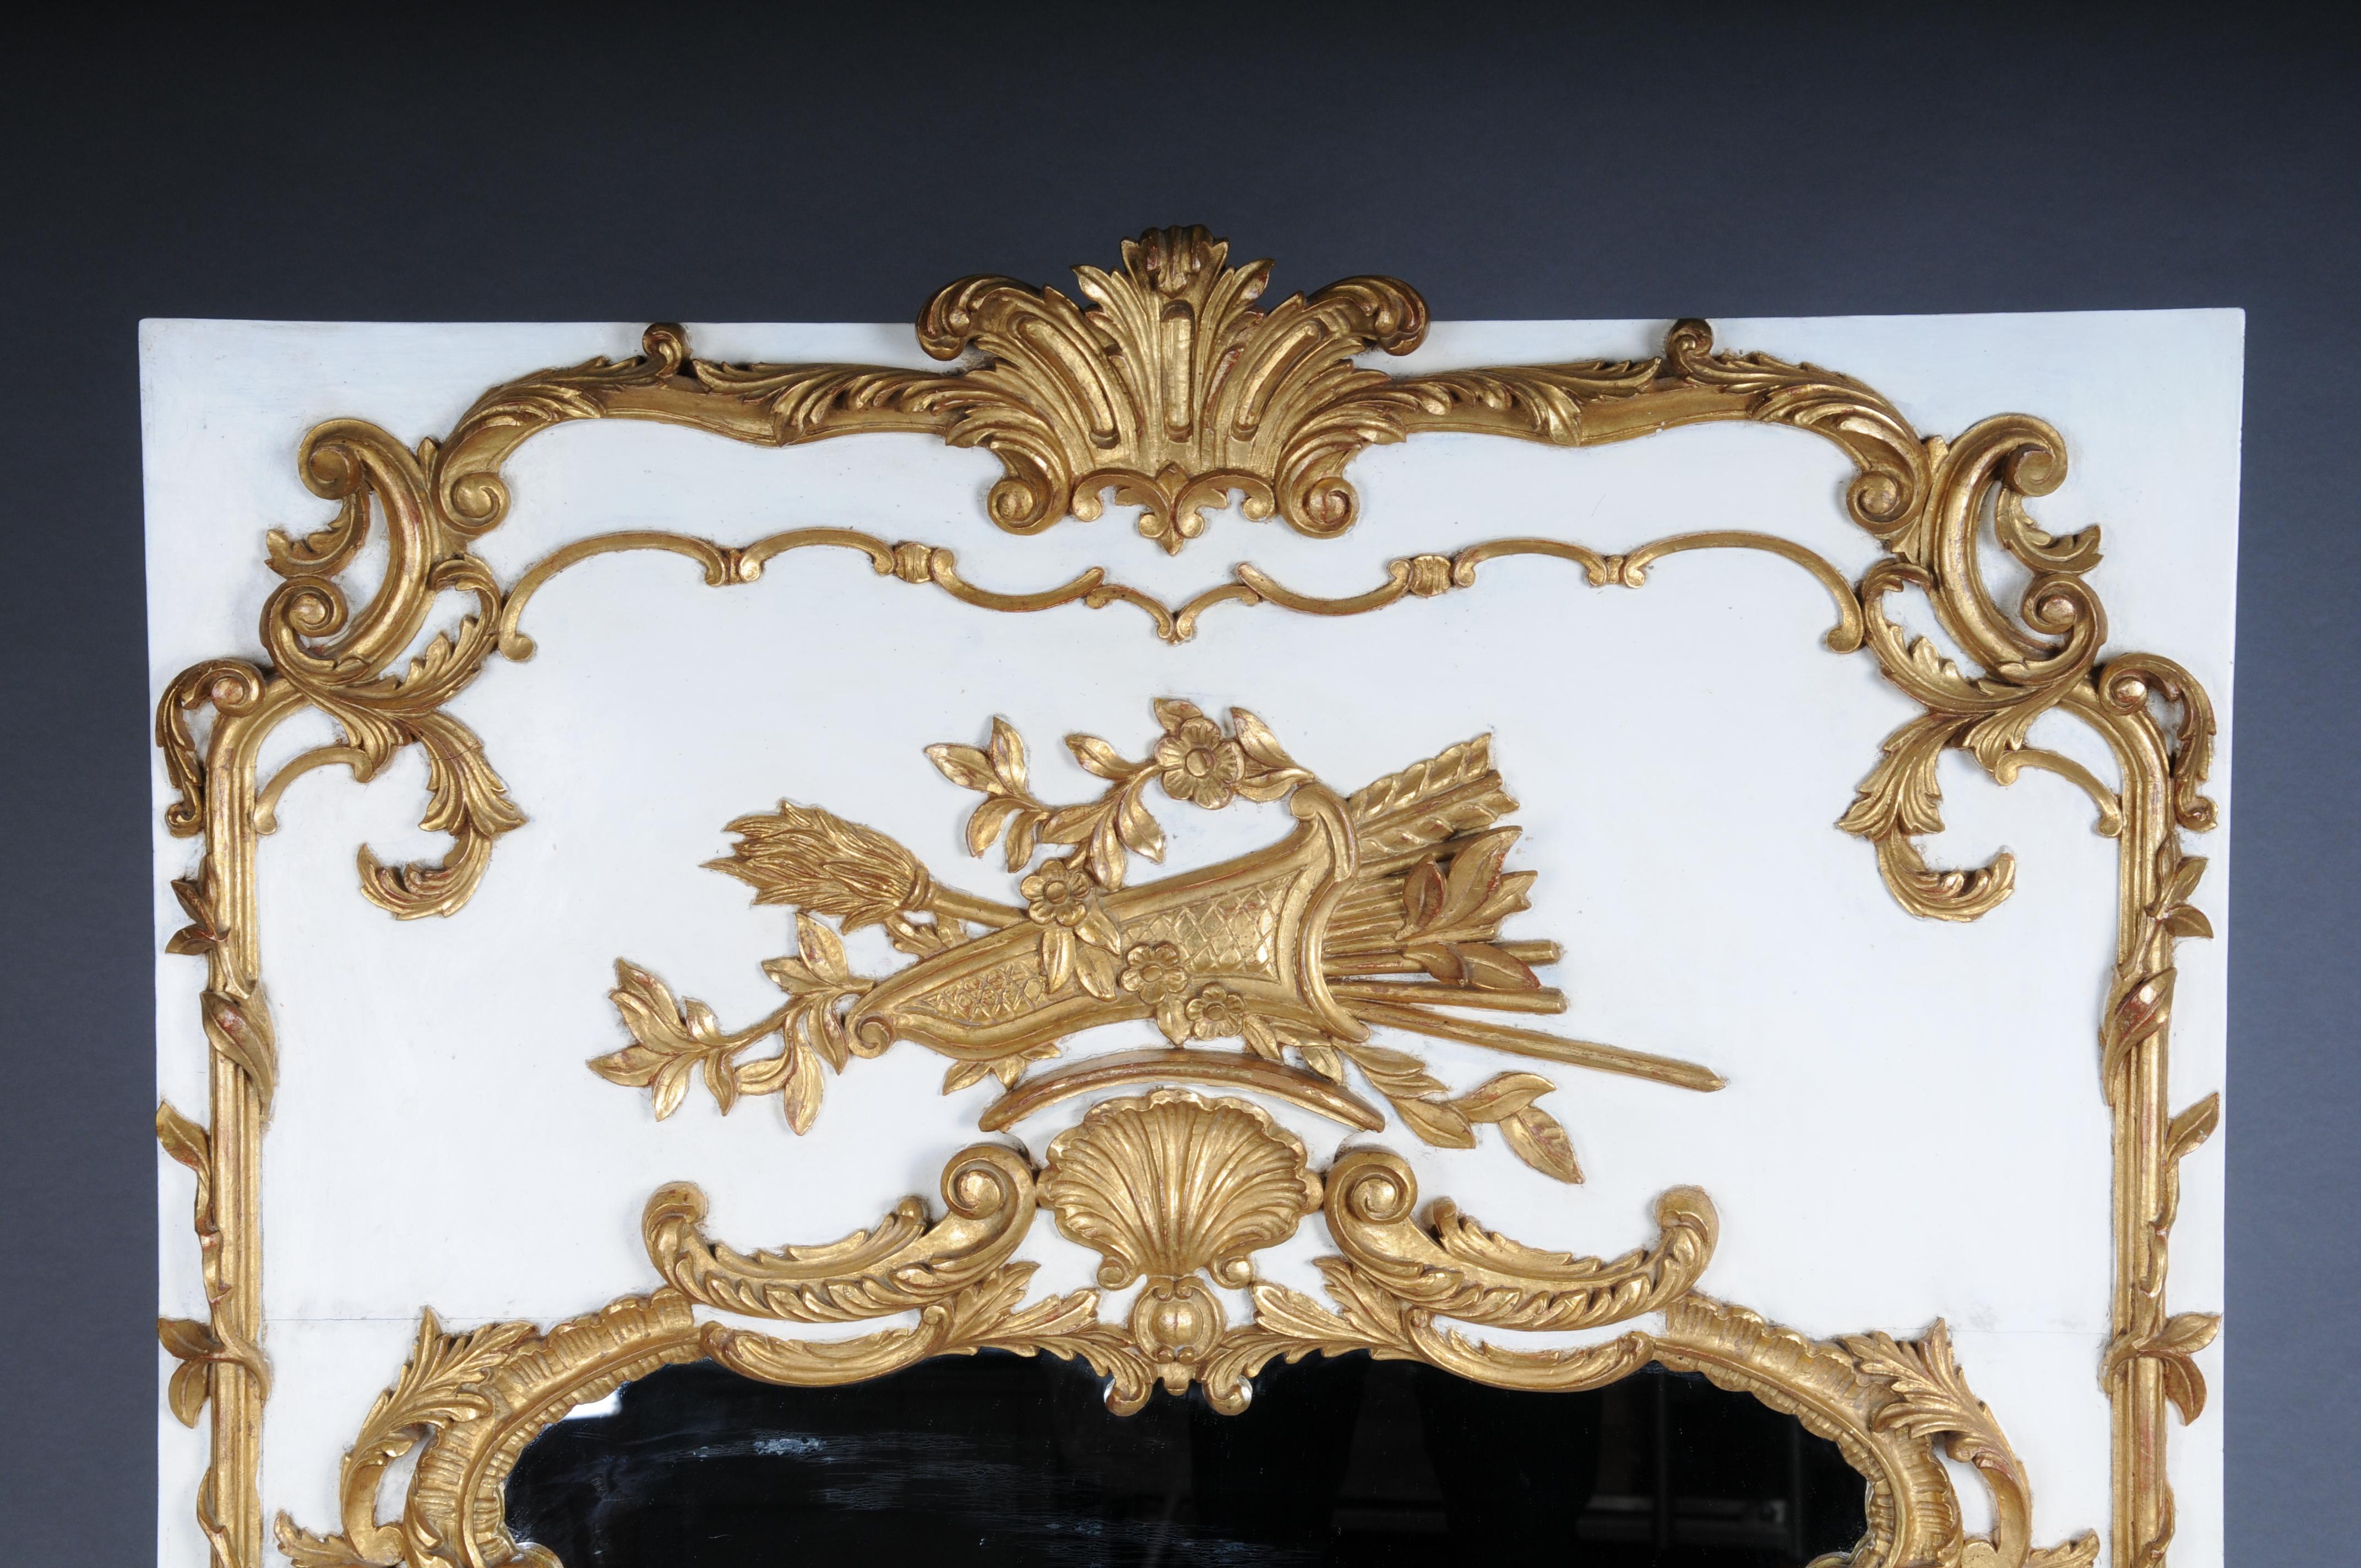 20th Century Louis XV gilt wall mirror, white

Tall rectangular wooden body plate with richly ornate carved decorative elements on a white background, crowned with a quiver and arrows. Extremely decorative and noble. Finely carved wooden